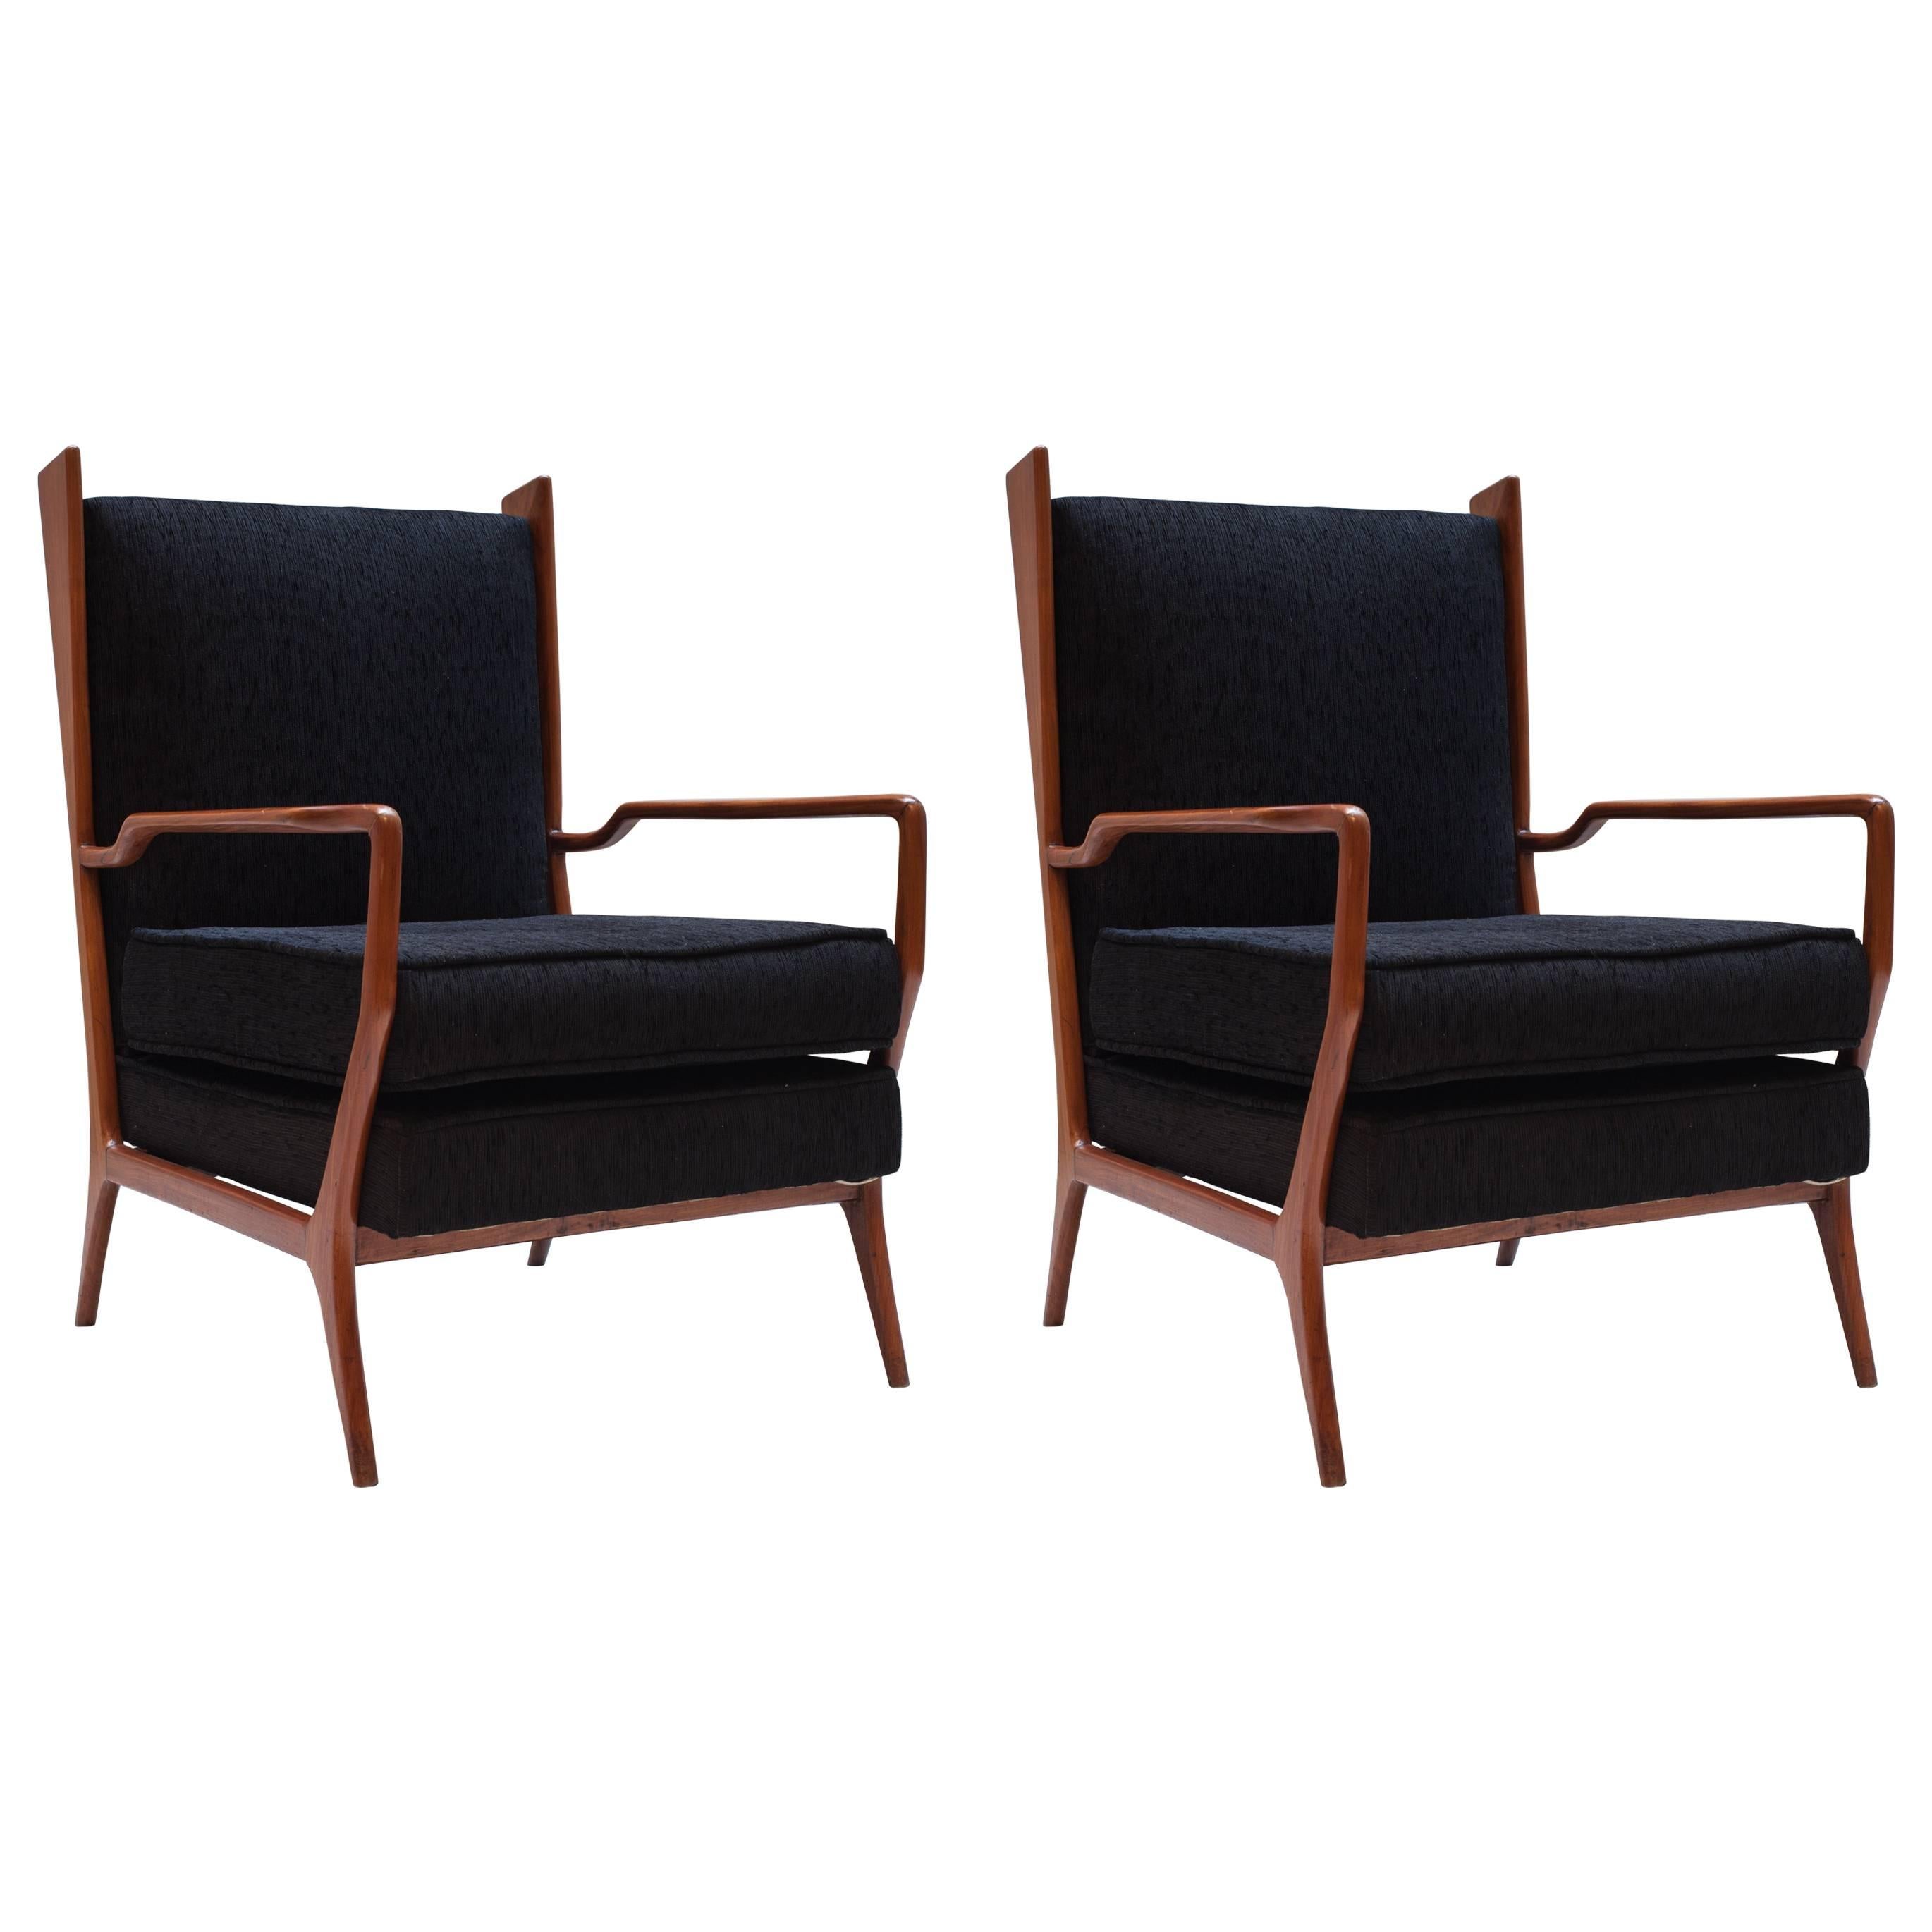 Pair of Rare Vintage 1960s Rino Levi Armchairs For Sale